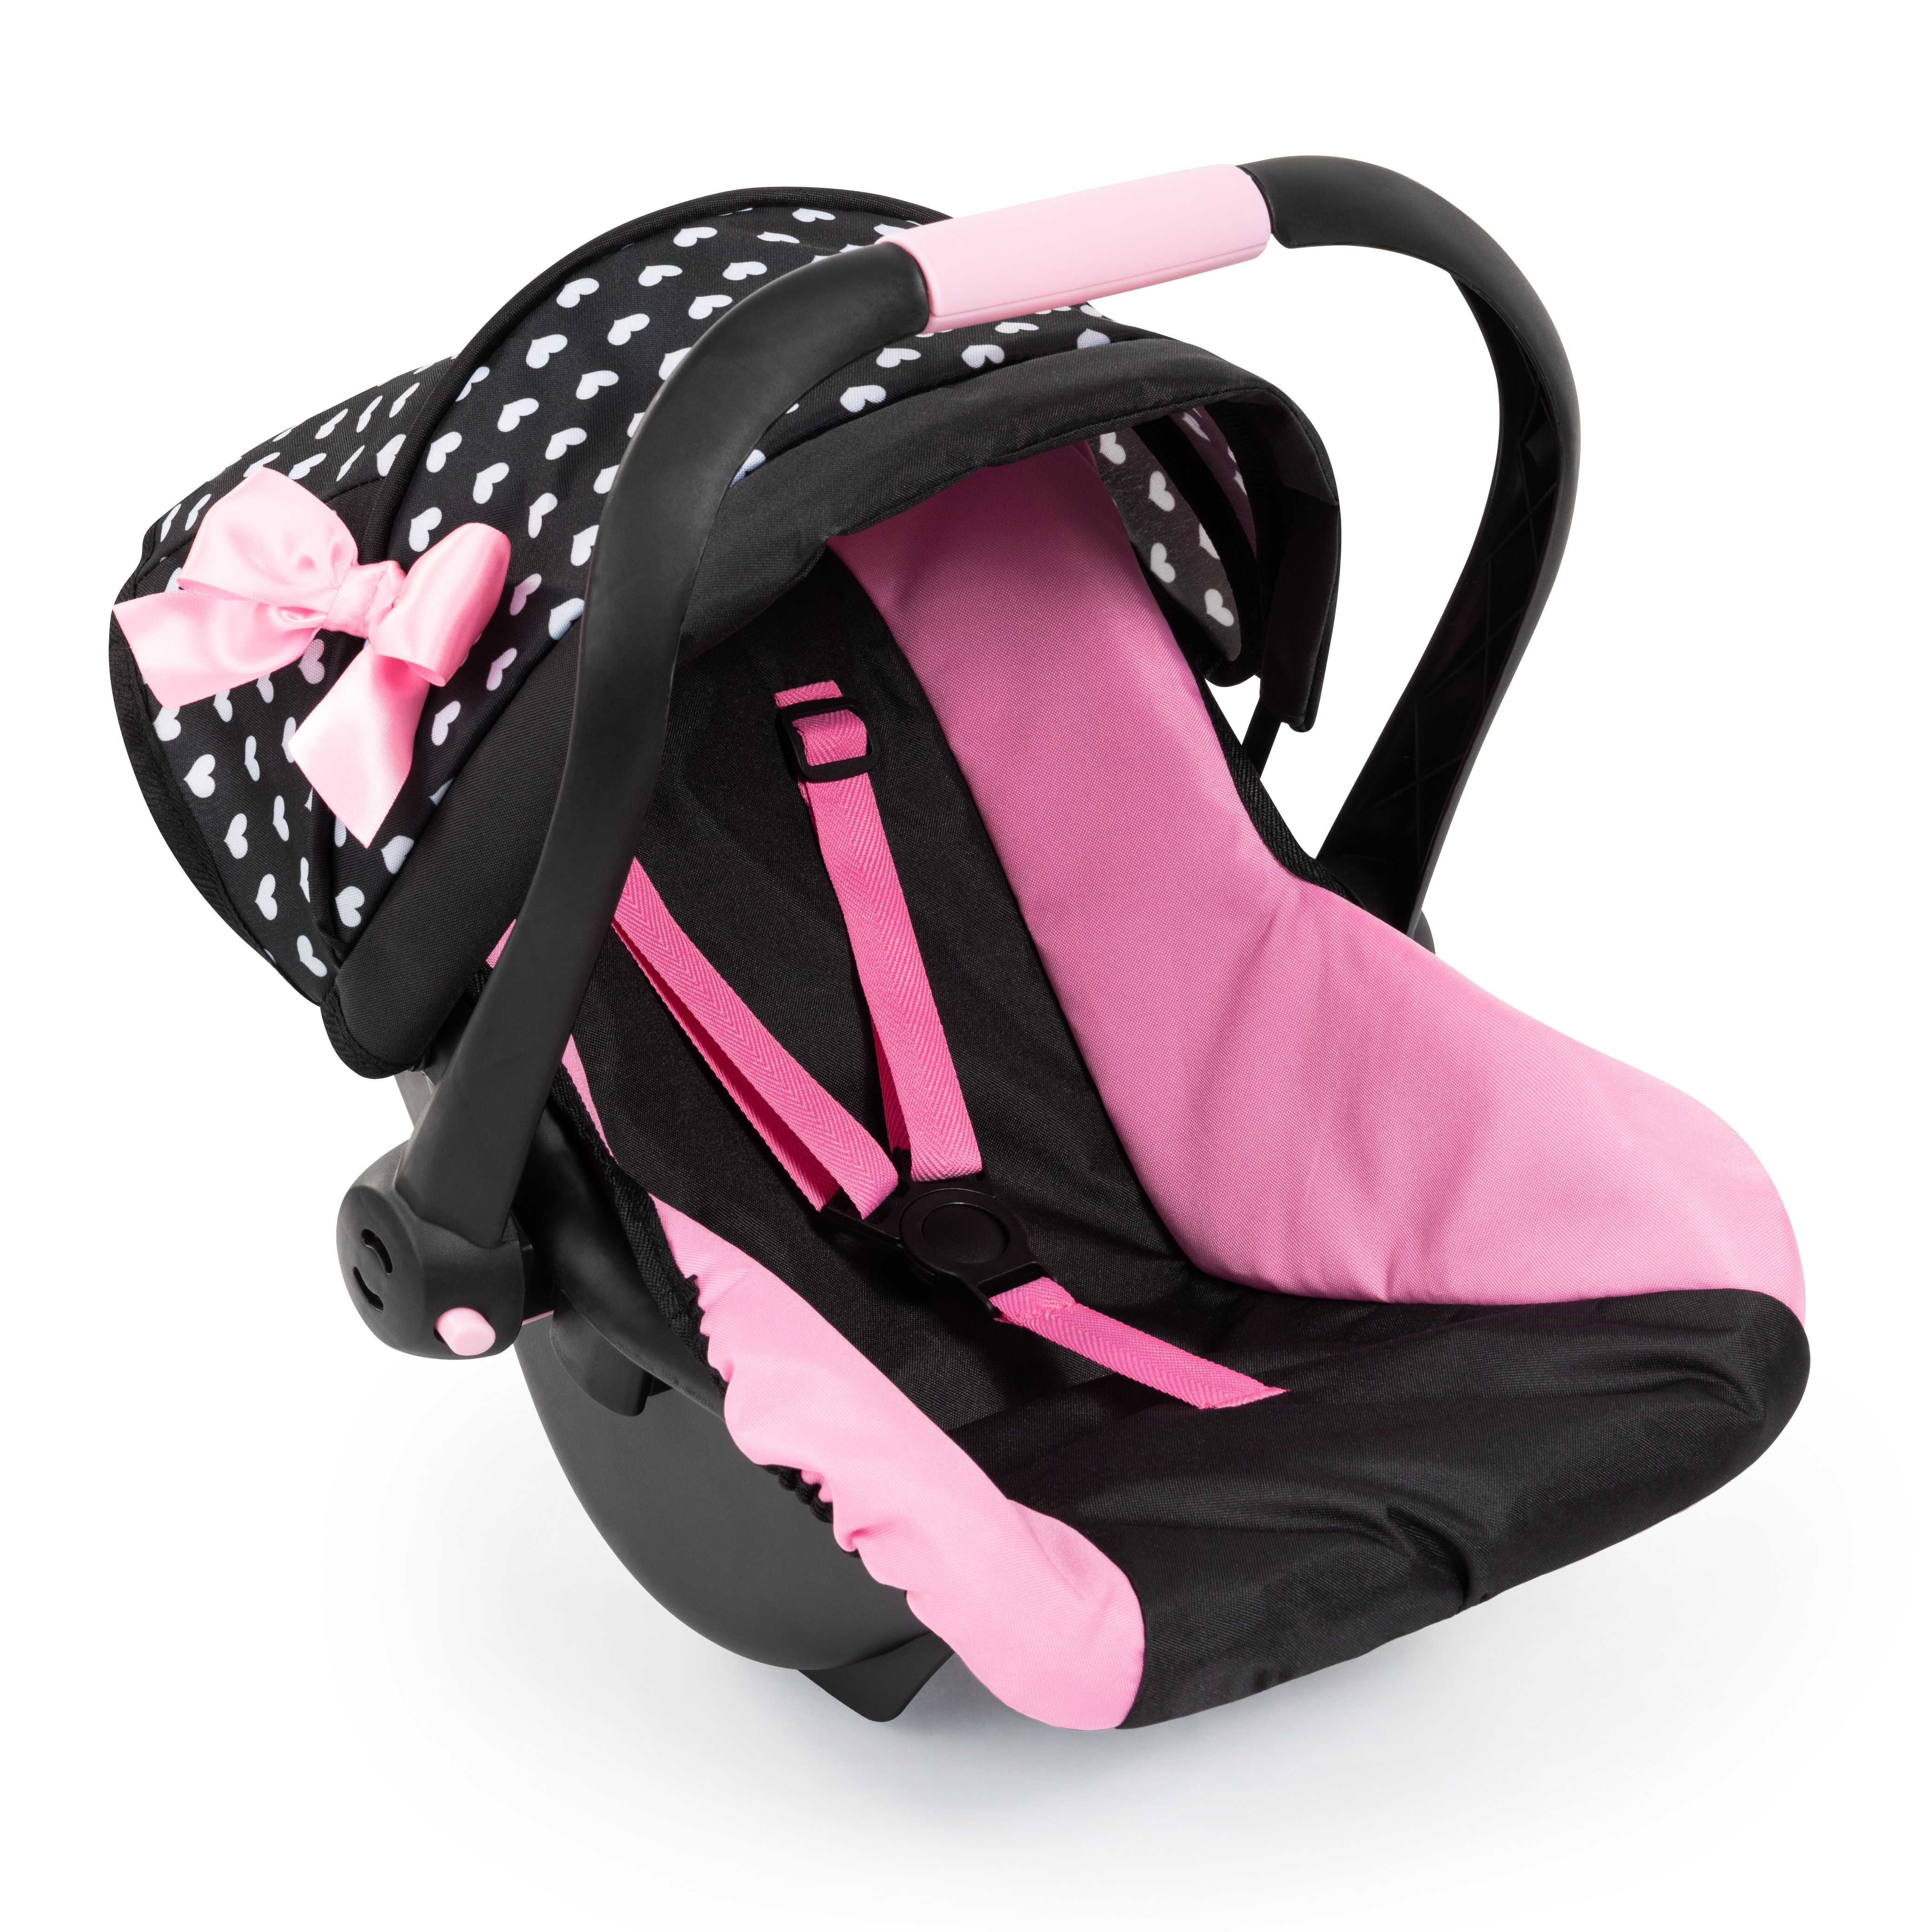 Bayer - Deluxe Car Seat for Dolls - Black&Pink (67960AA) - Leker